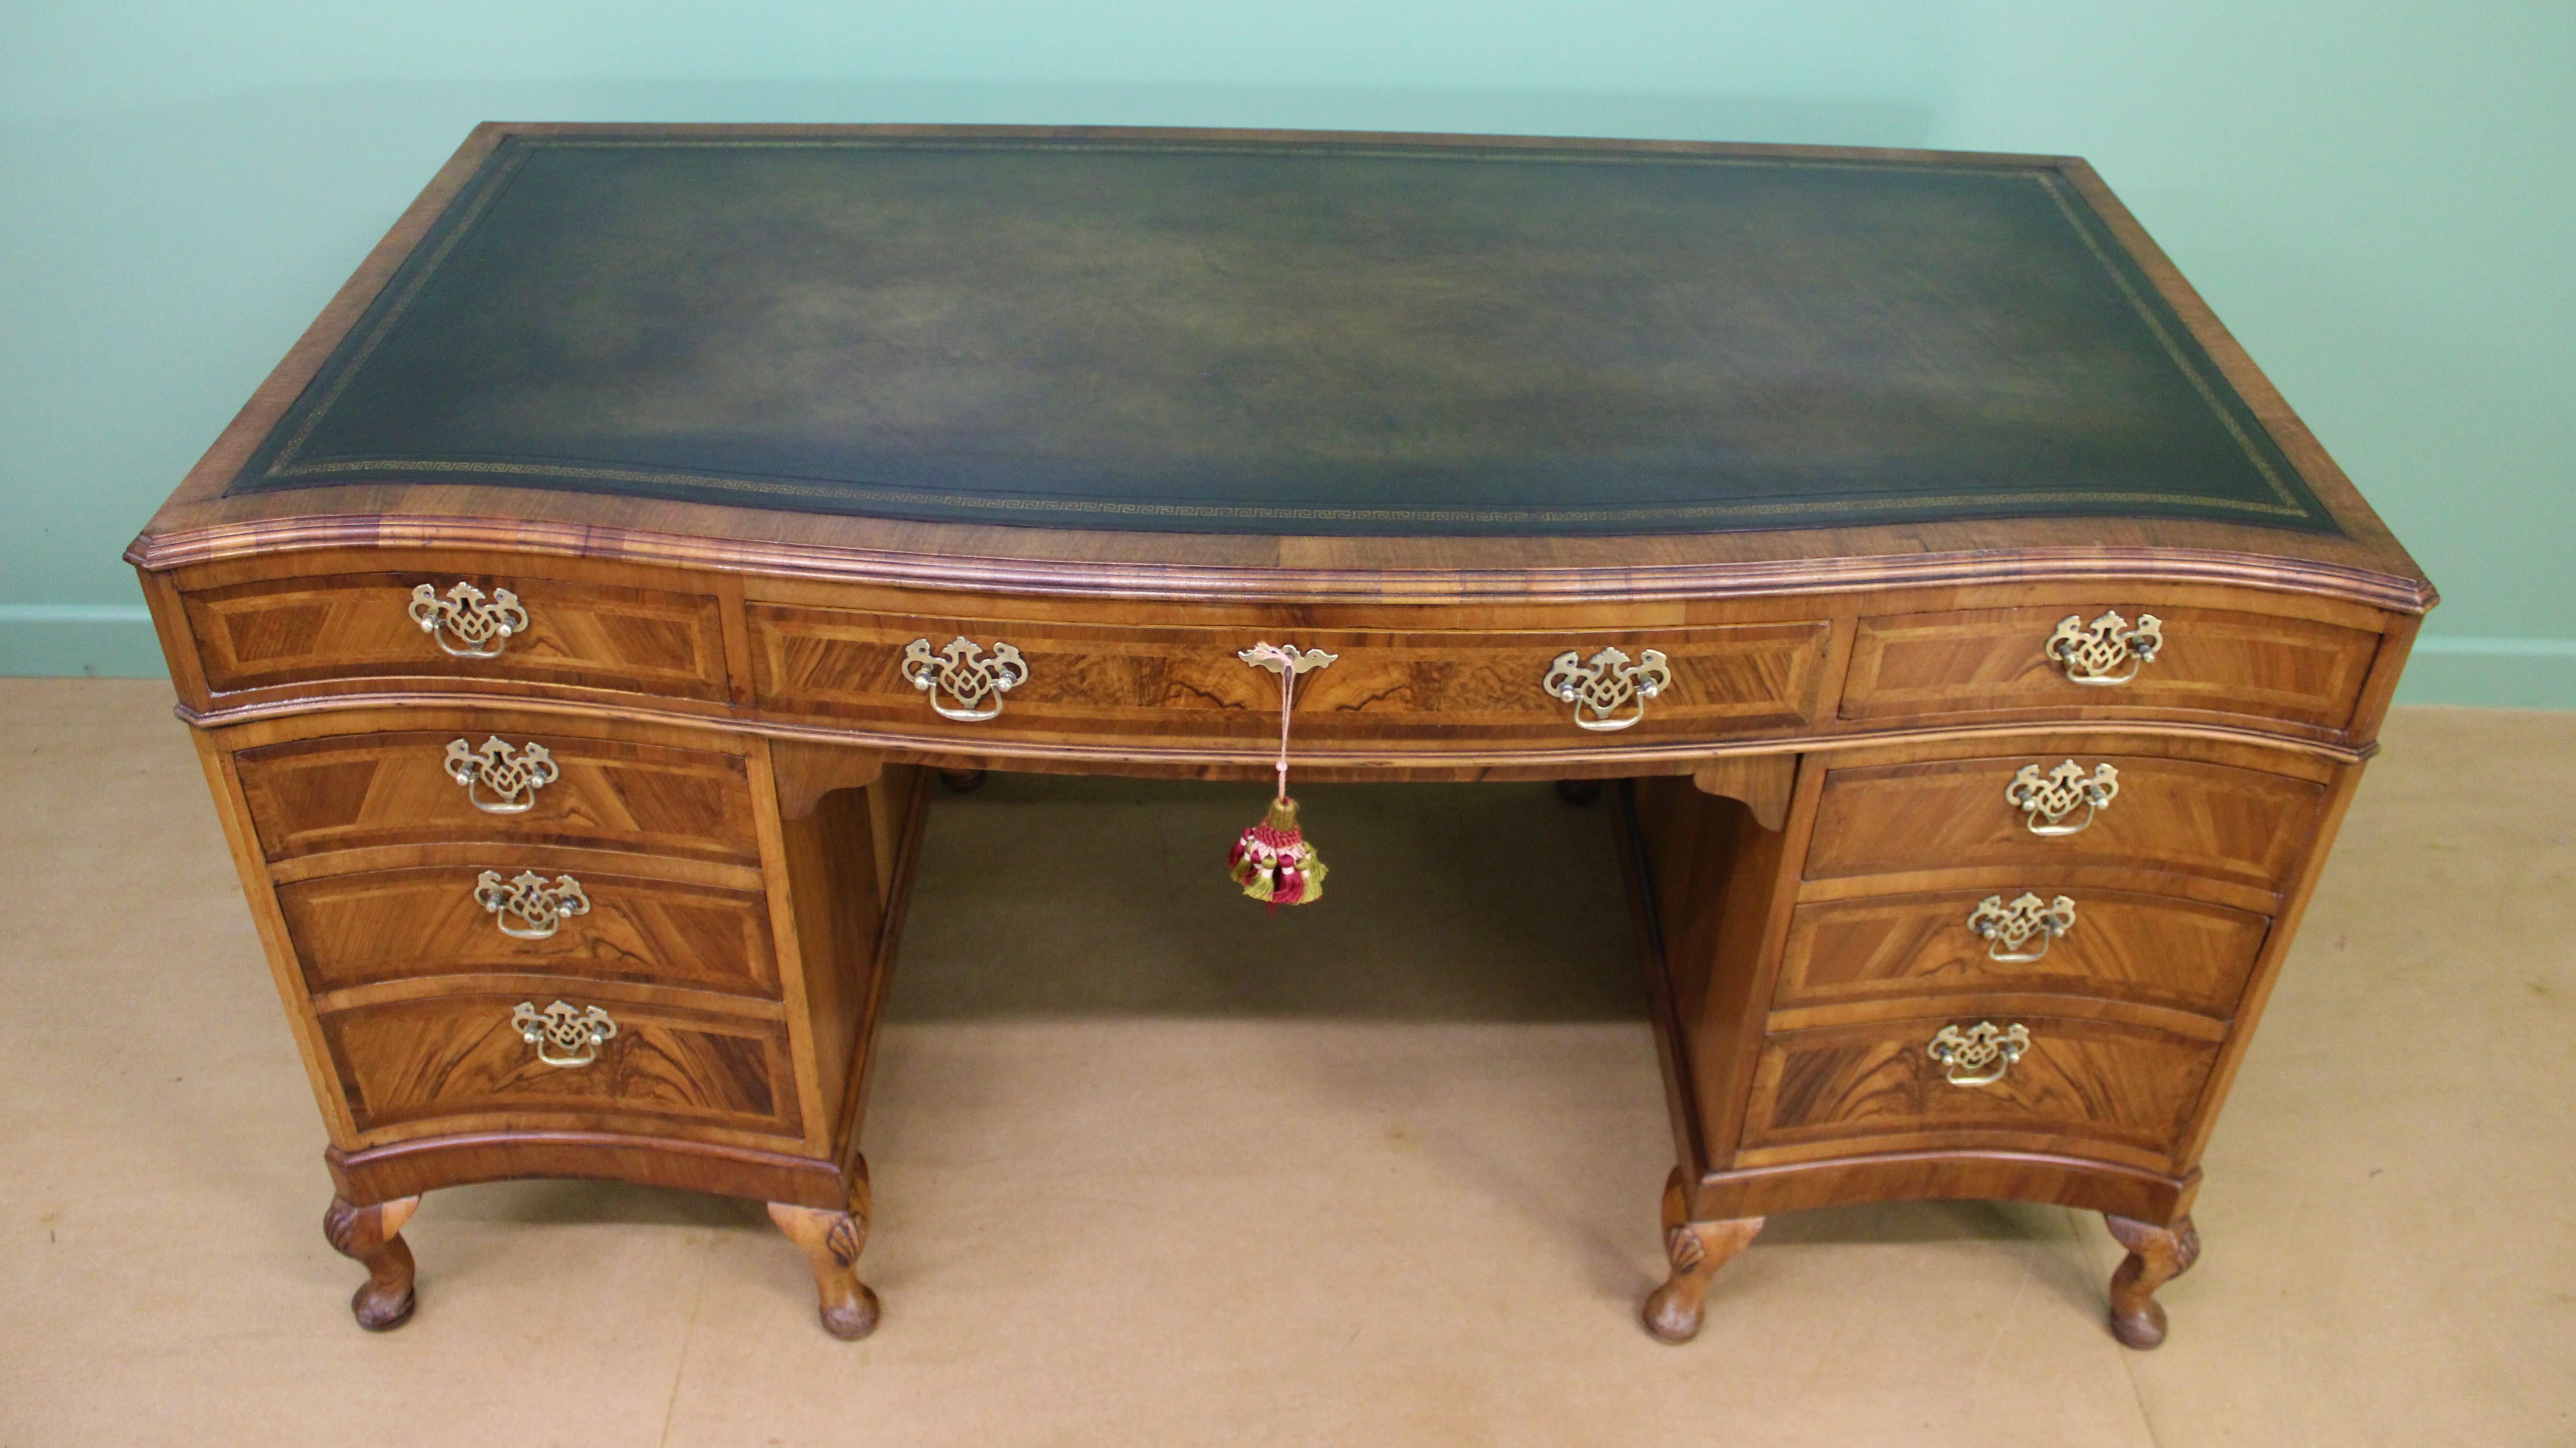 A very good Queen Anne style burr walnut pedestal desk of generous proportions. Well constructed in solid walnut with attractive burr walnut veneers. Of serpentine form with a series of 9 drawers, all fitted with their original solid brass handles.